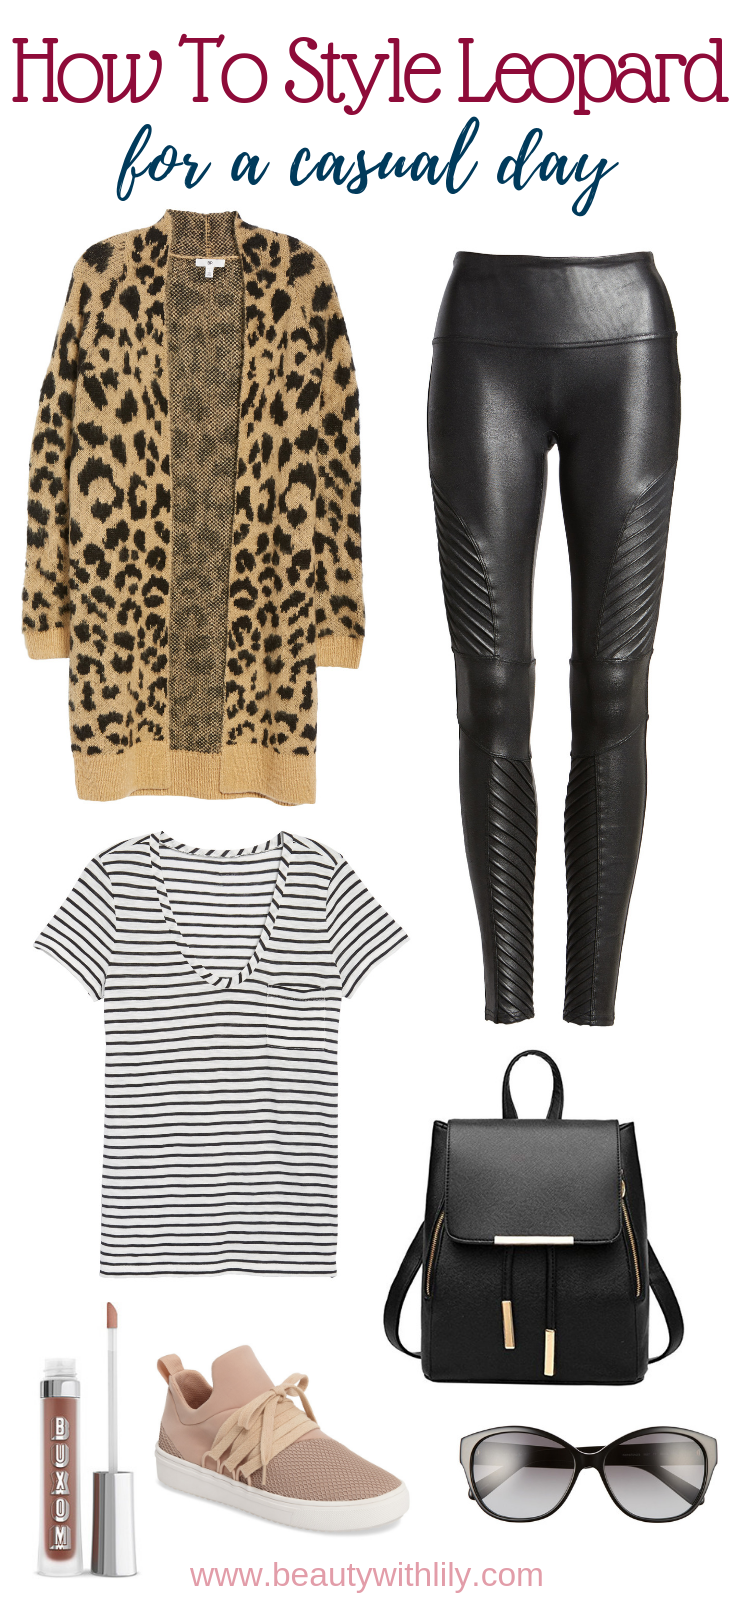 How To Style Leopard Print - Beauty With Lily